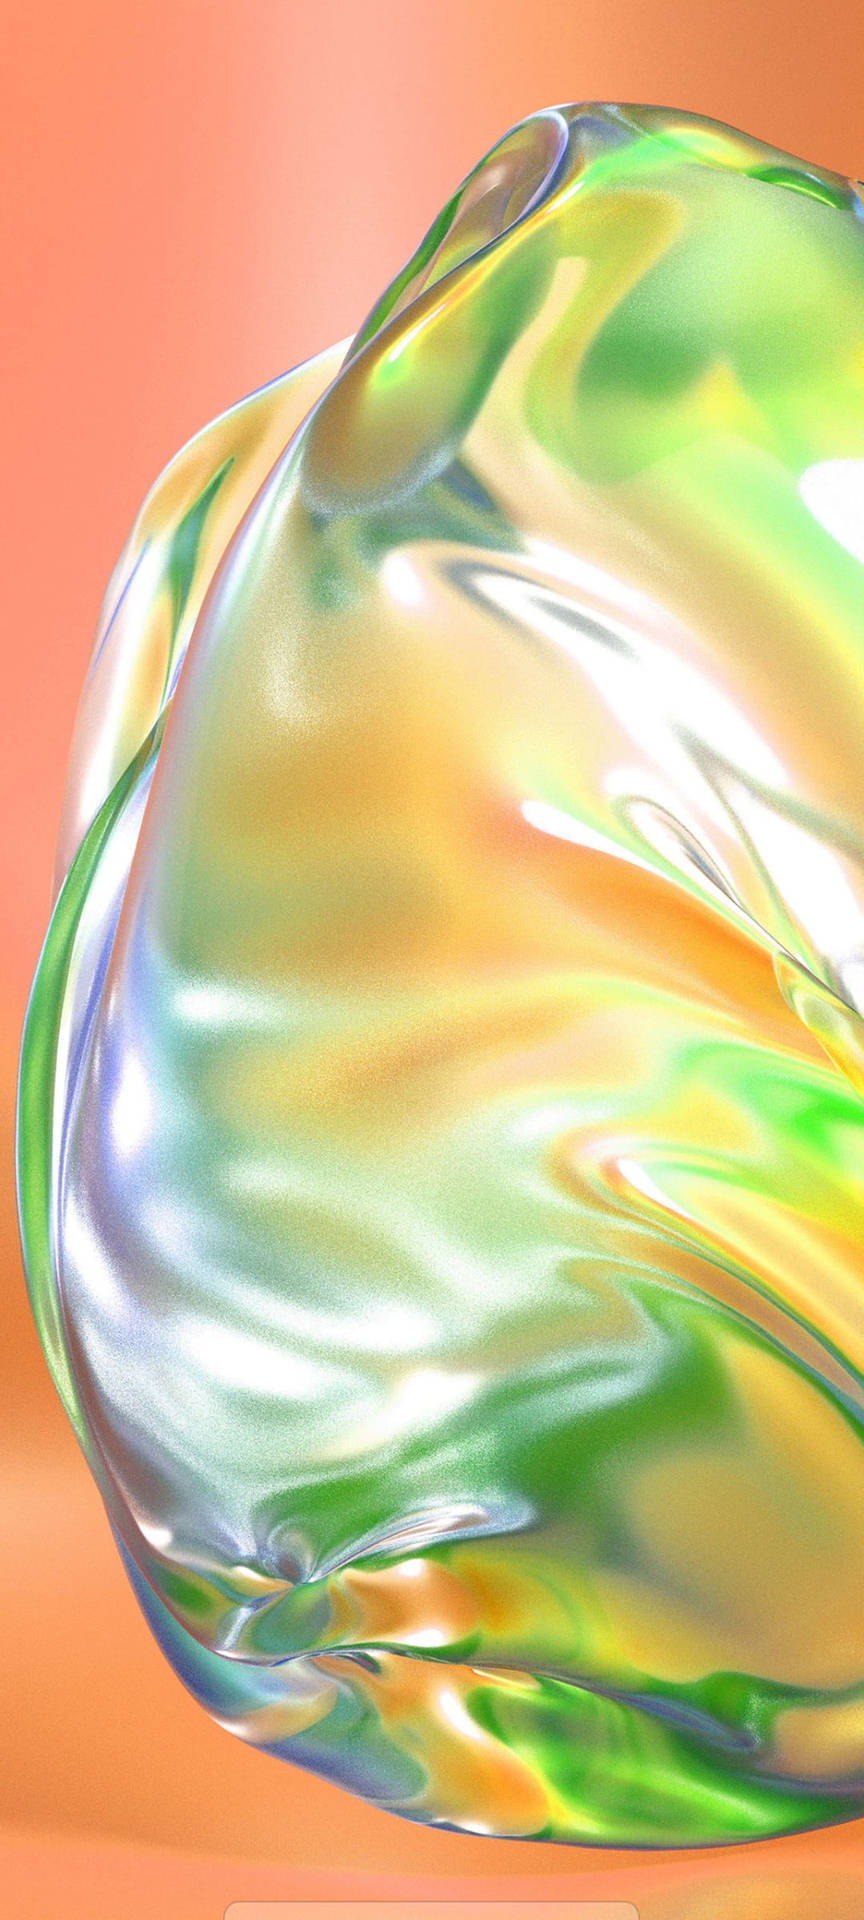 Samsung A51 Water Bubble Close-up Background